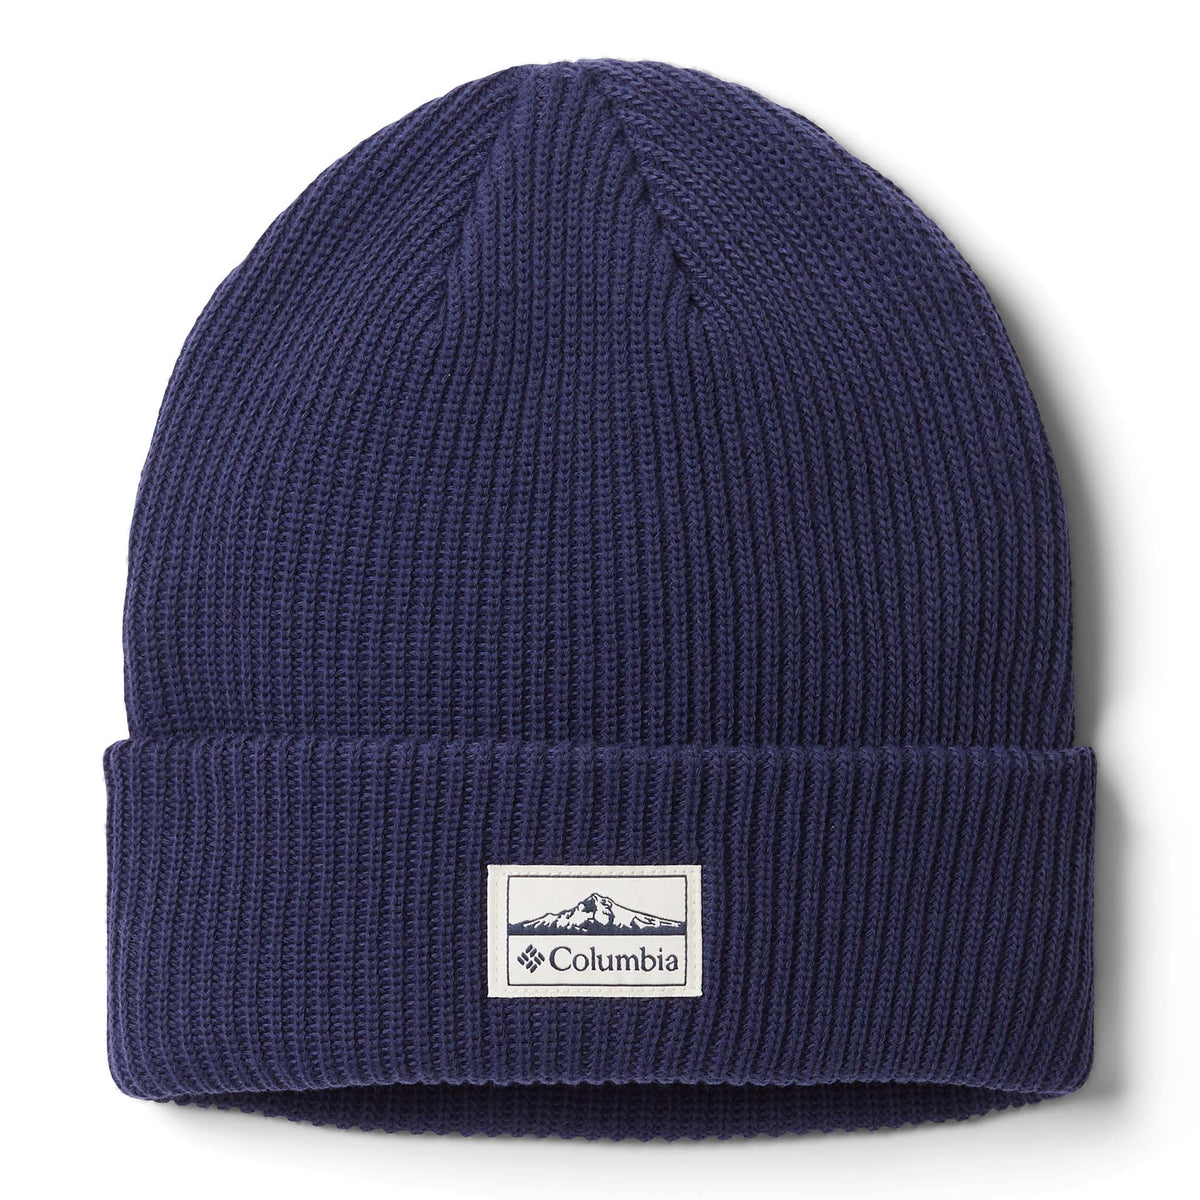 Columbia Lost Lager Beanie II tuque unisexe nocturnal